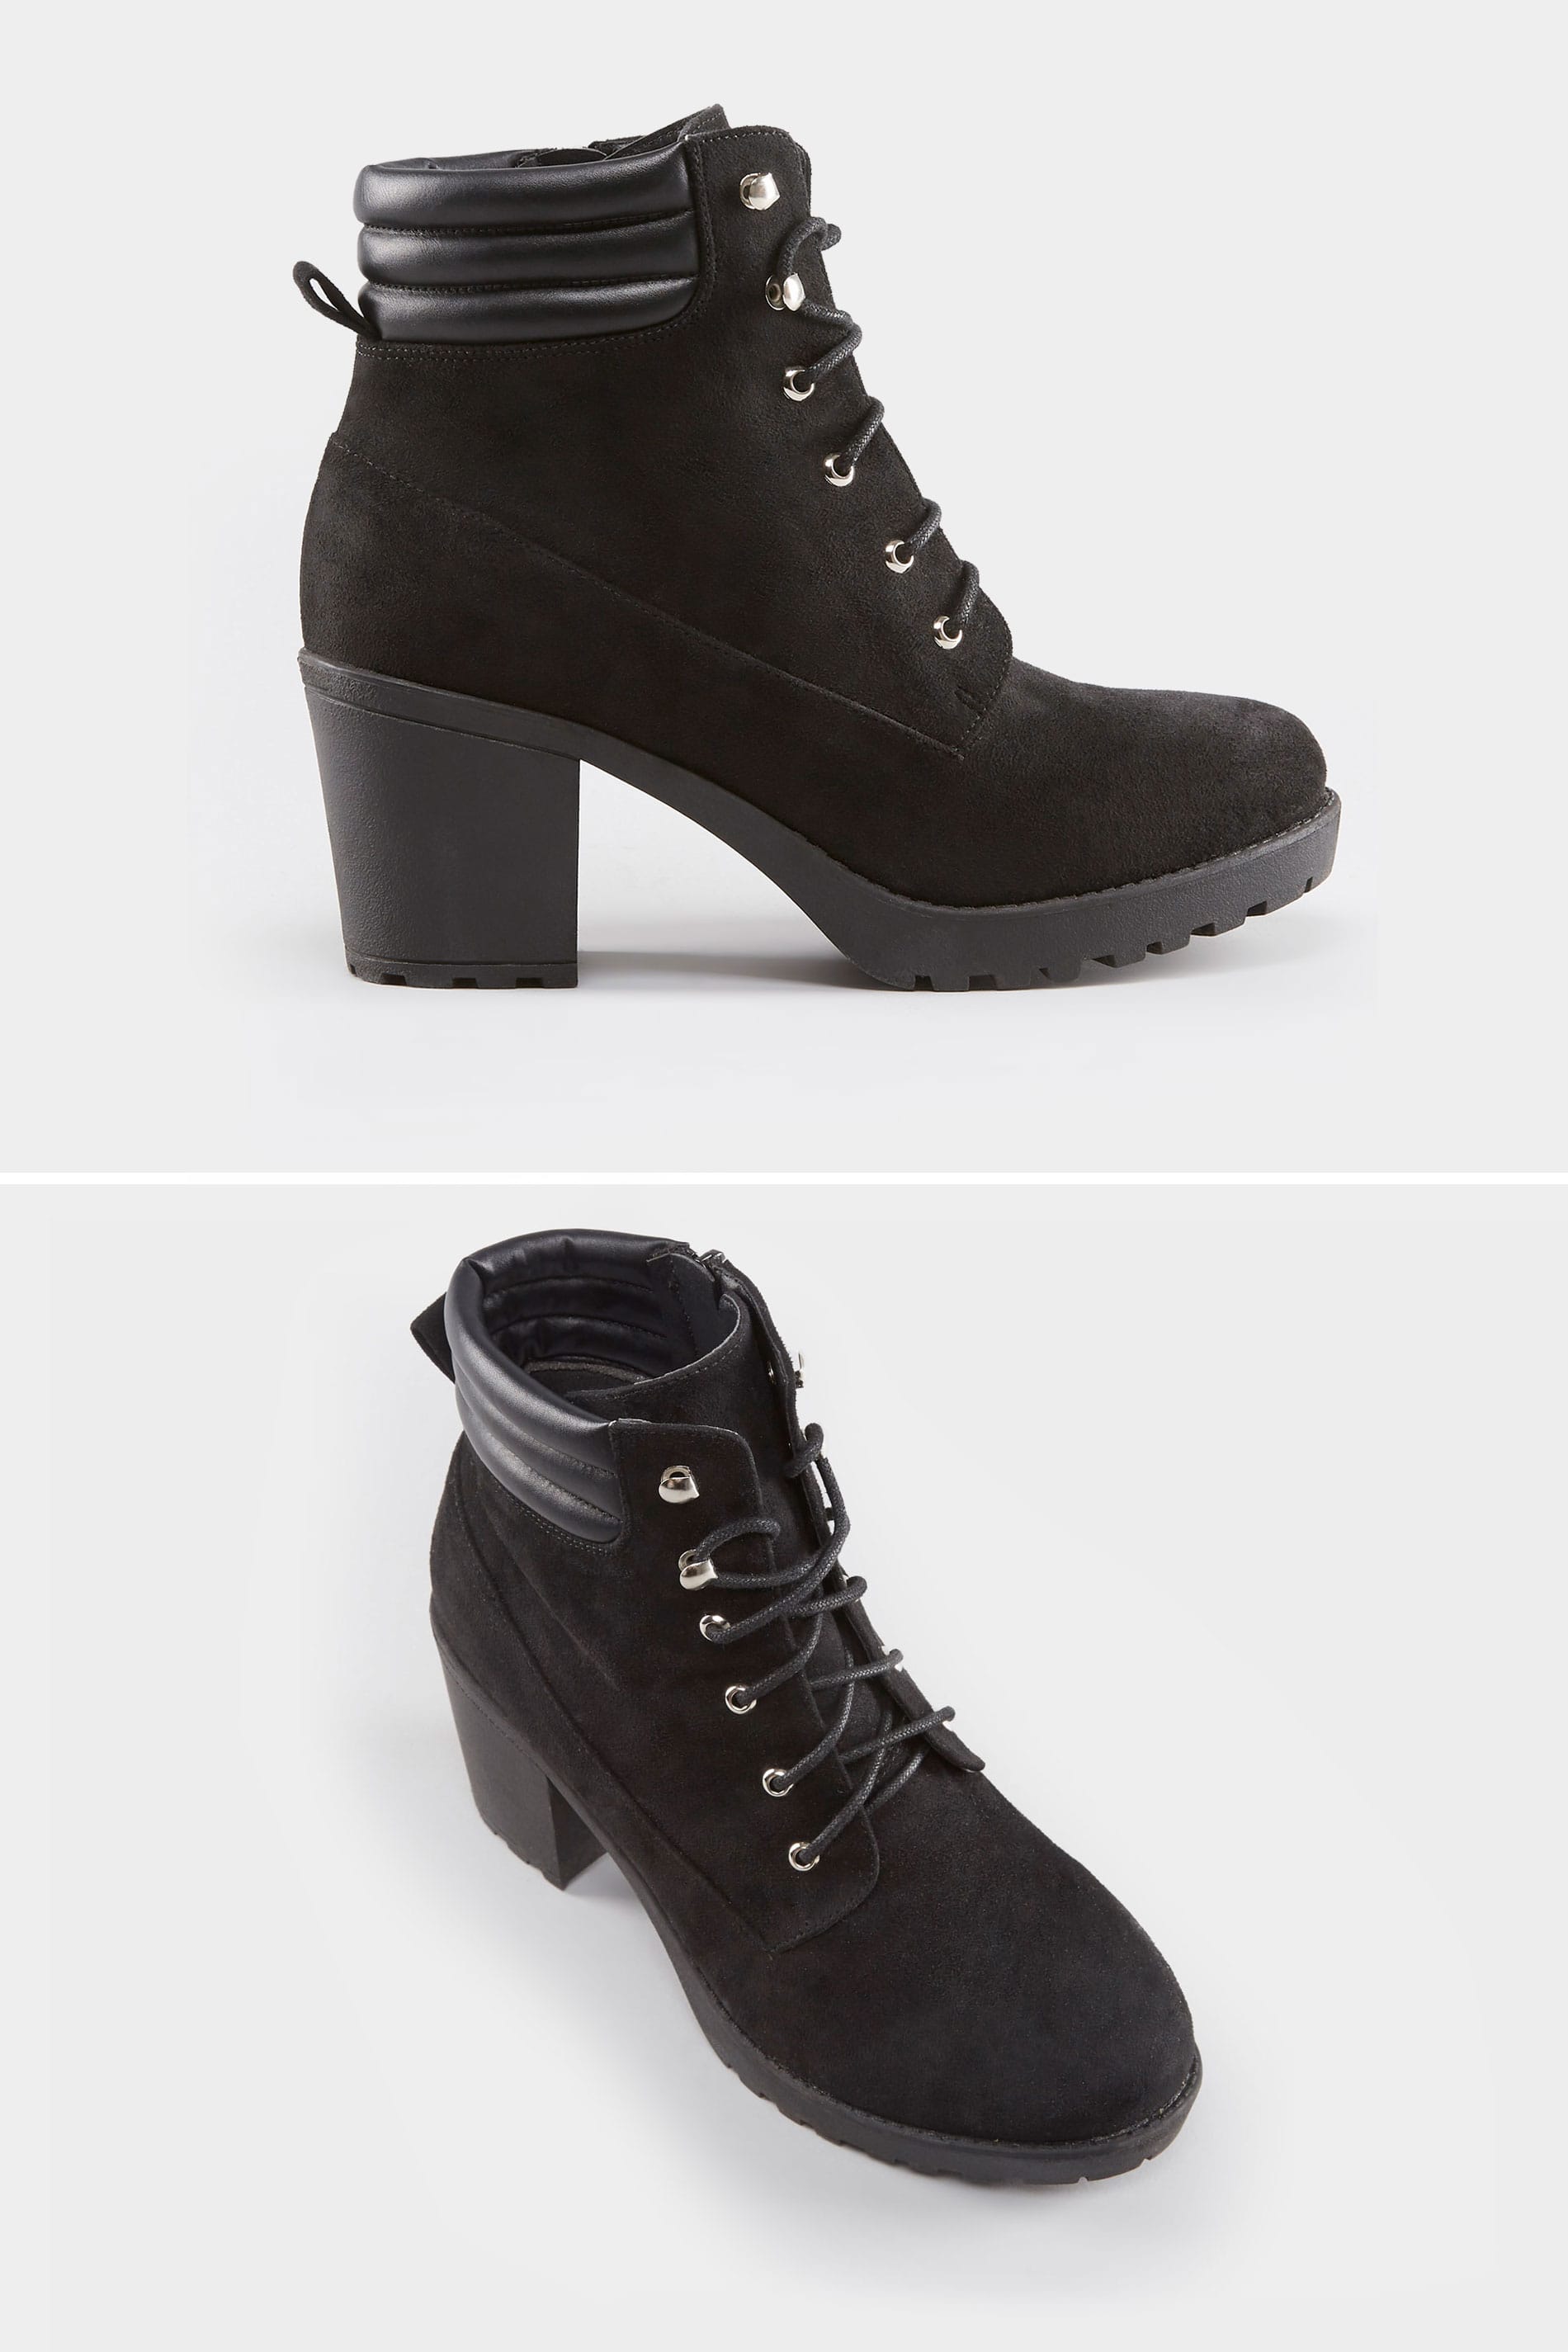 Black Lace Up Heeled Ankle Boot In EEE Fit, Wide Fitting ...